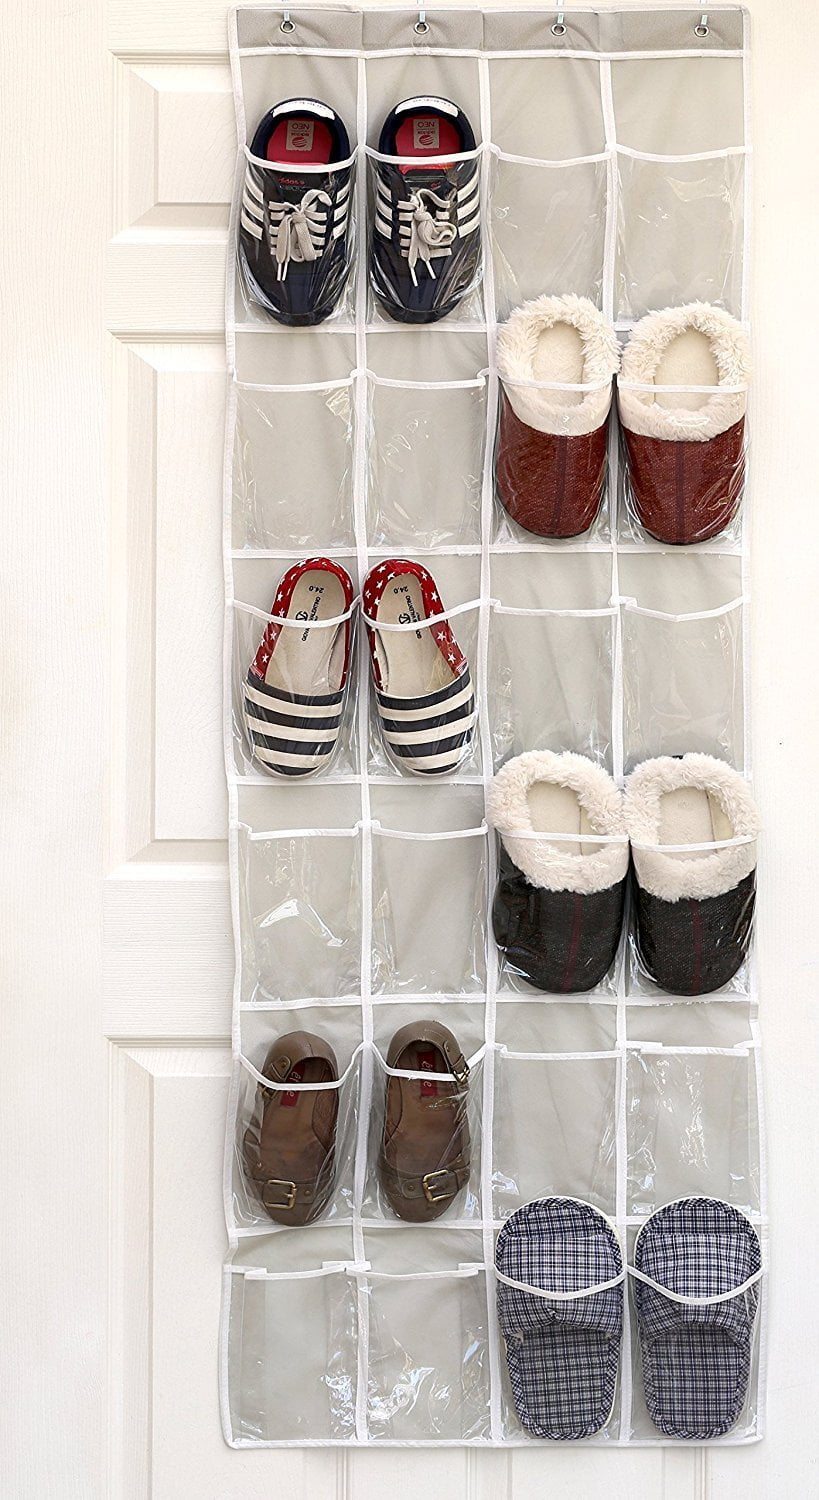 SimpleHouseware Crystal Clear Over The Door Hanging Shoe Organizer, 24 Pockets 